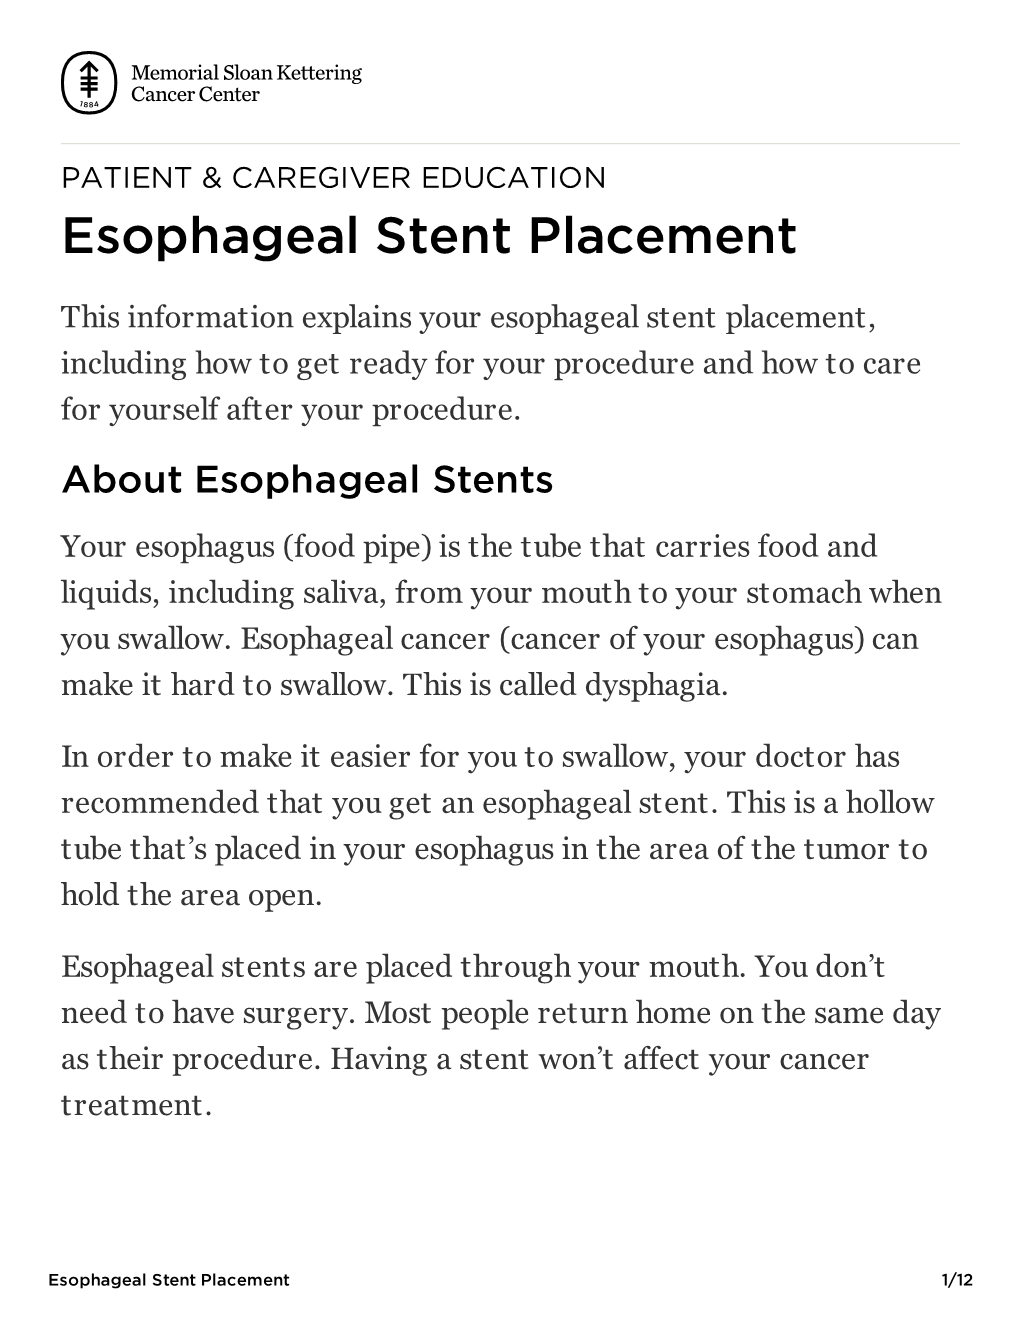 Esophageal Stent Placement | Memorial Sloan Kettering Cancer